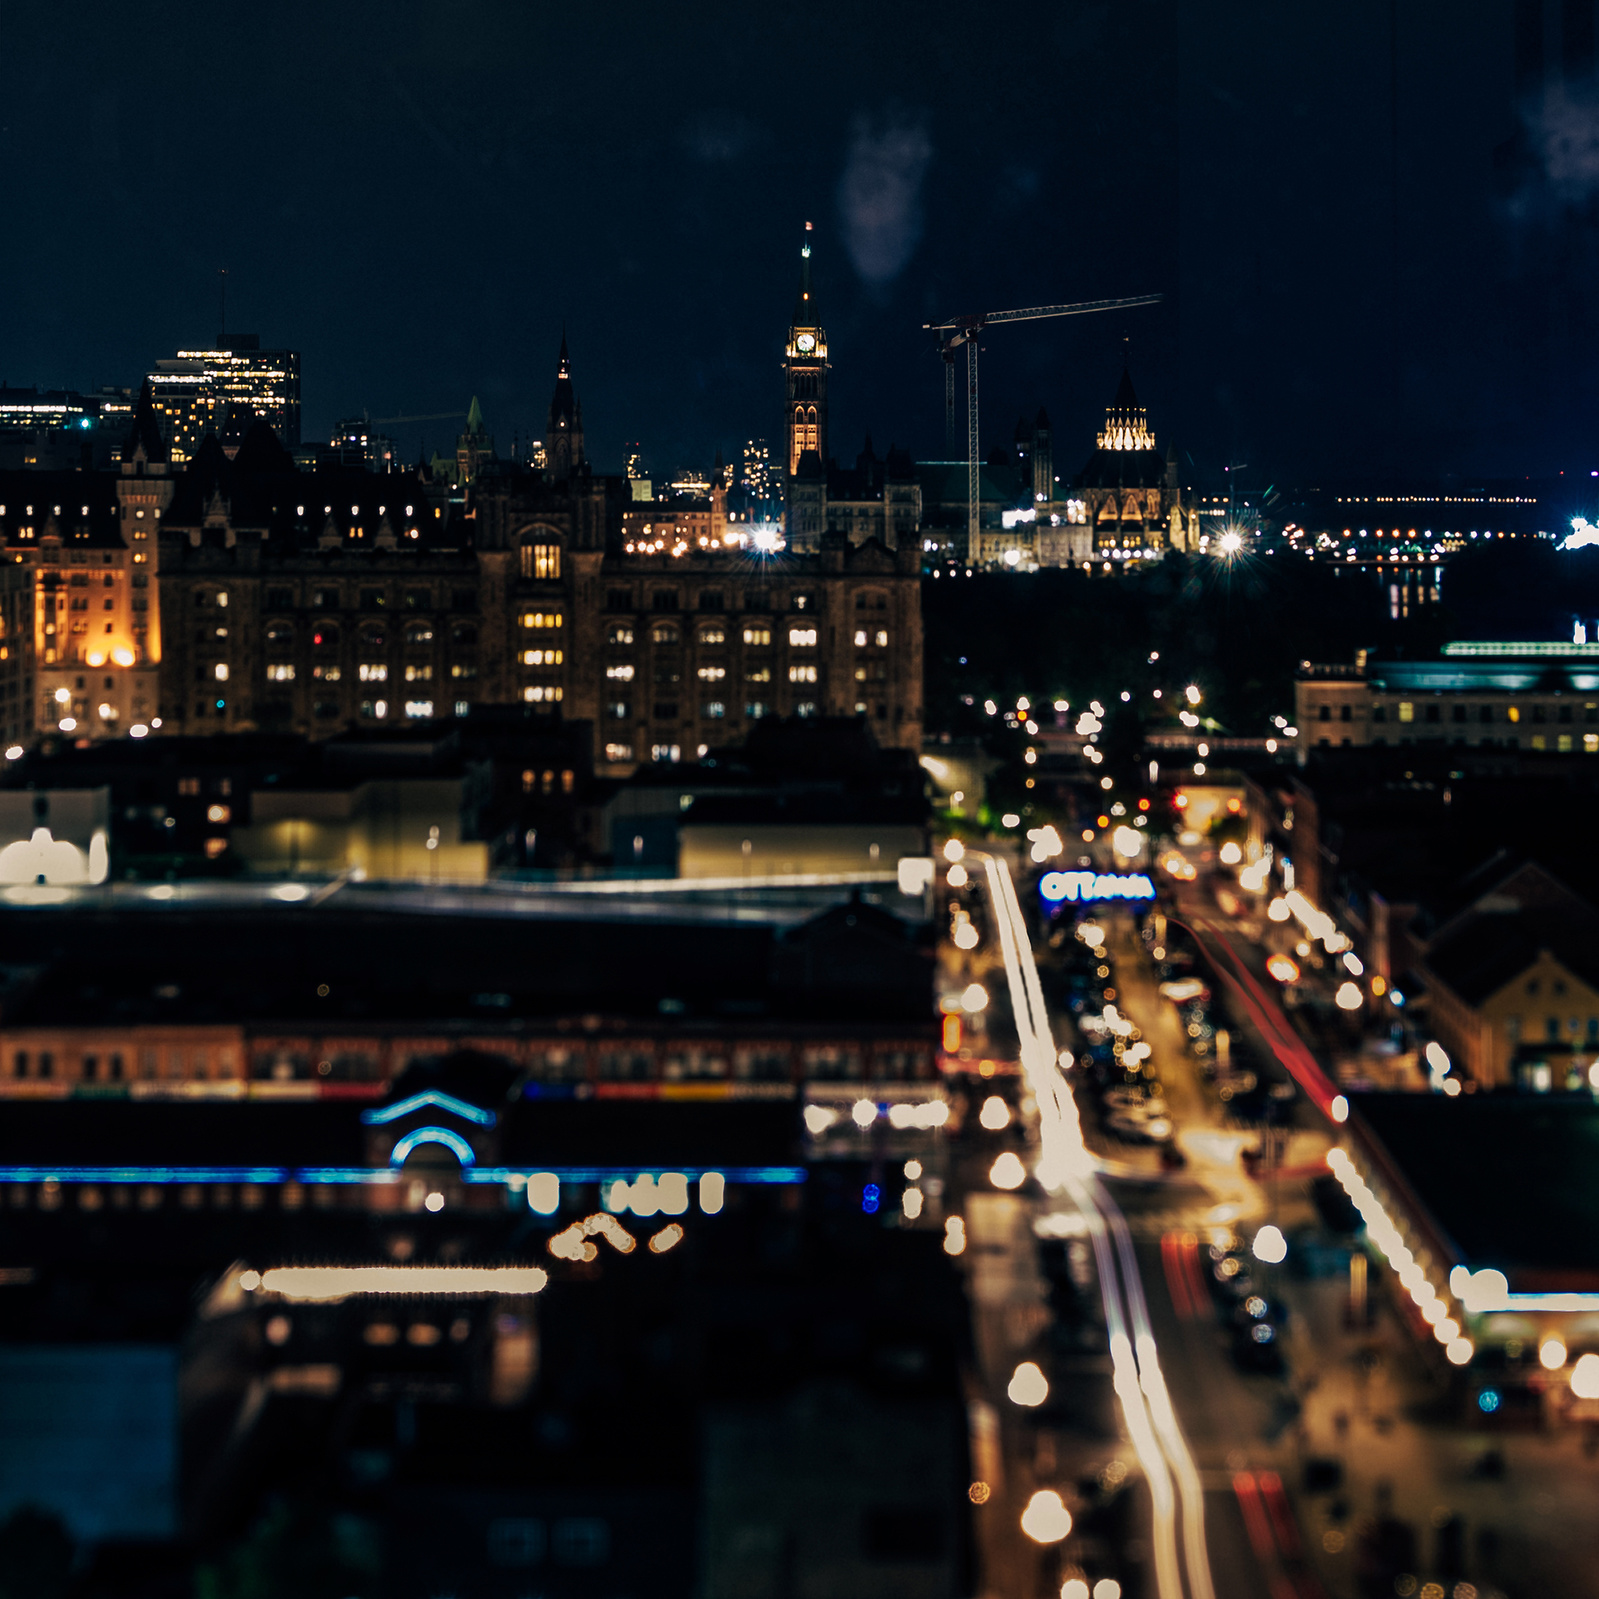 Byward Market at night photographed from rooftop at Andaz